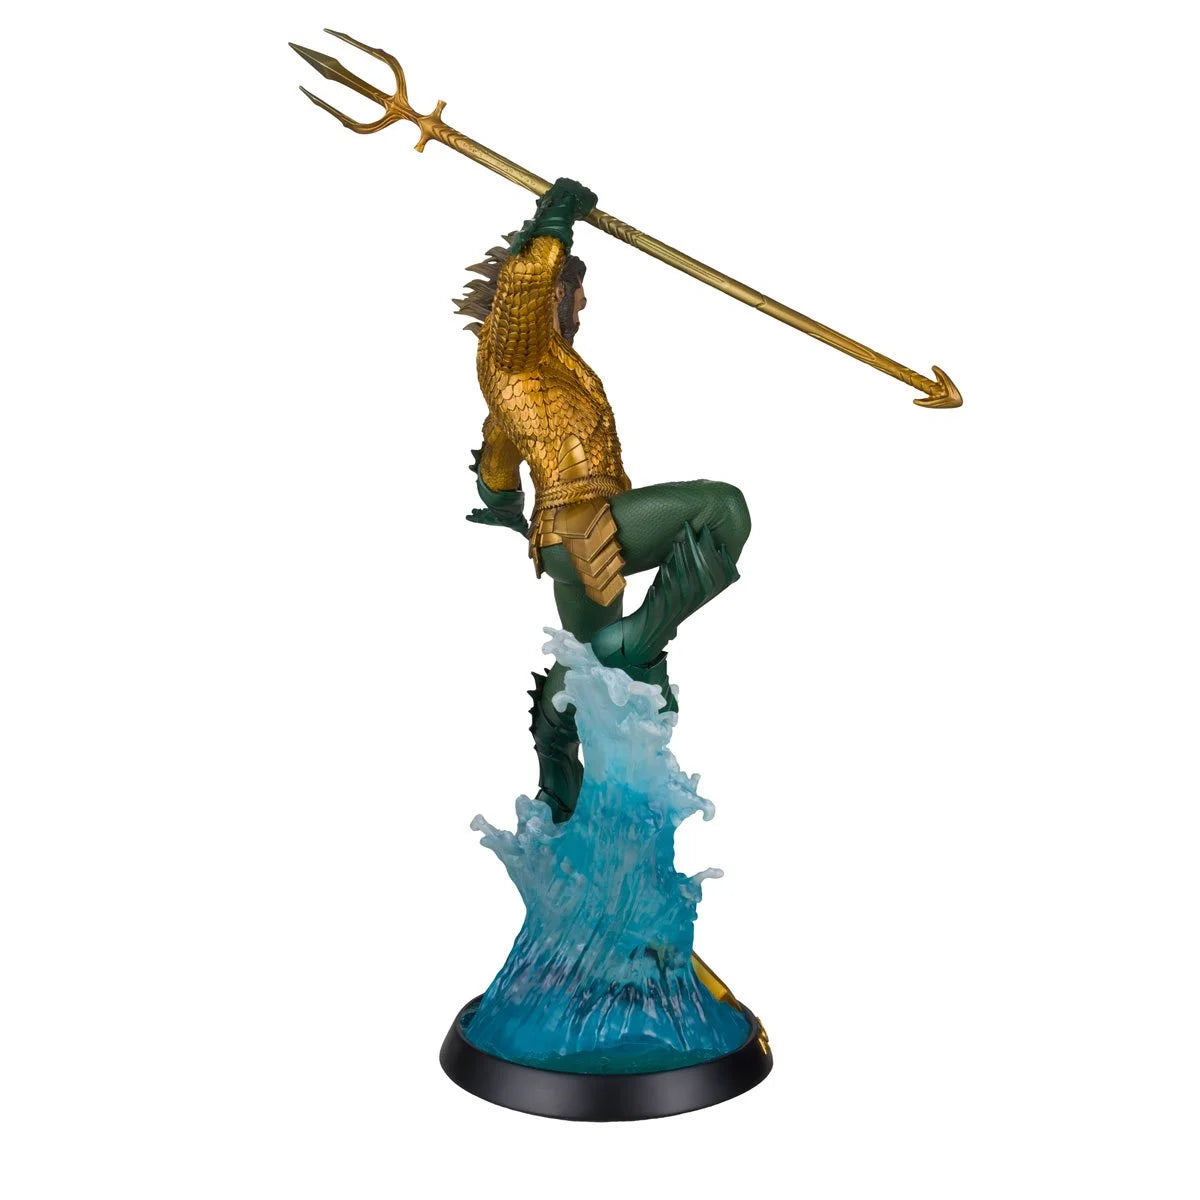 DC Aquaman and the Lost Kingdom Movie 12-Inch Scale Resin Statue by McFarlane Toys -McFarlane Toys - India - www.superherotoystore.com